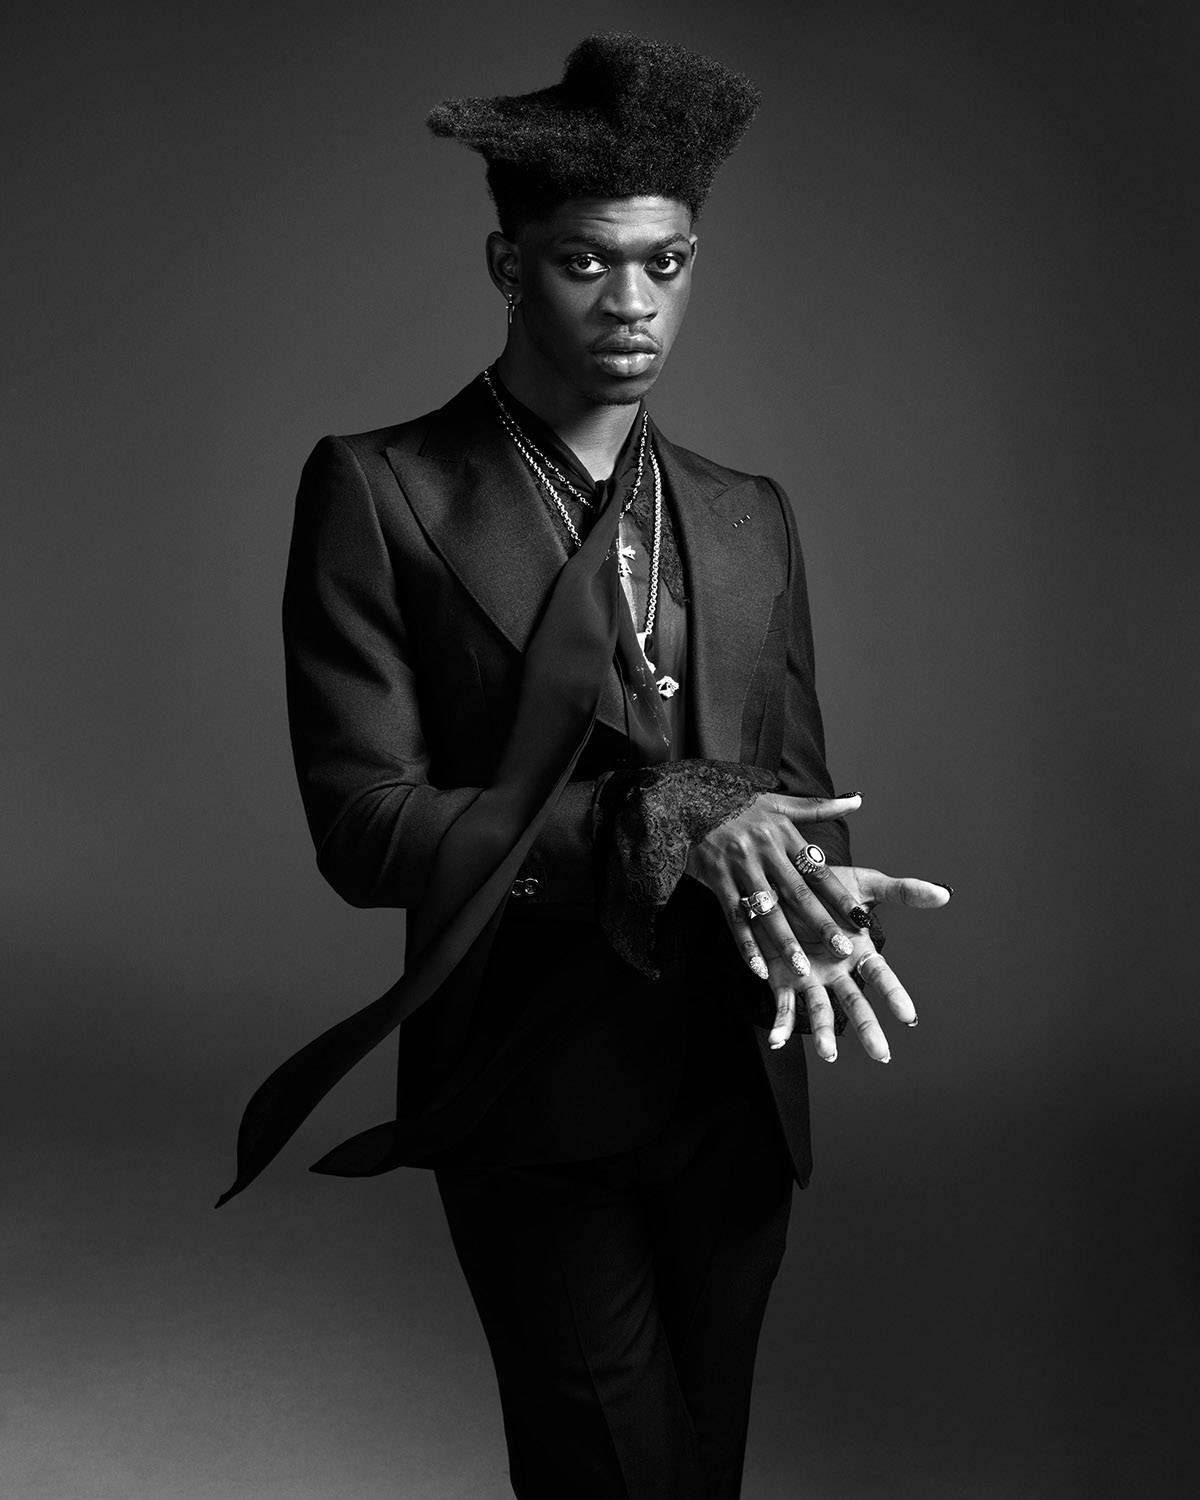 Lil Nas X covers L’Uomo Vogue Issue 12 by Ethan James Green